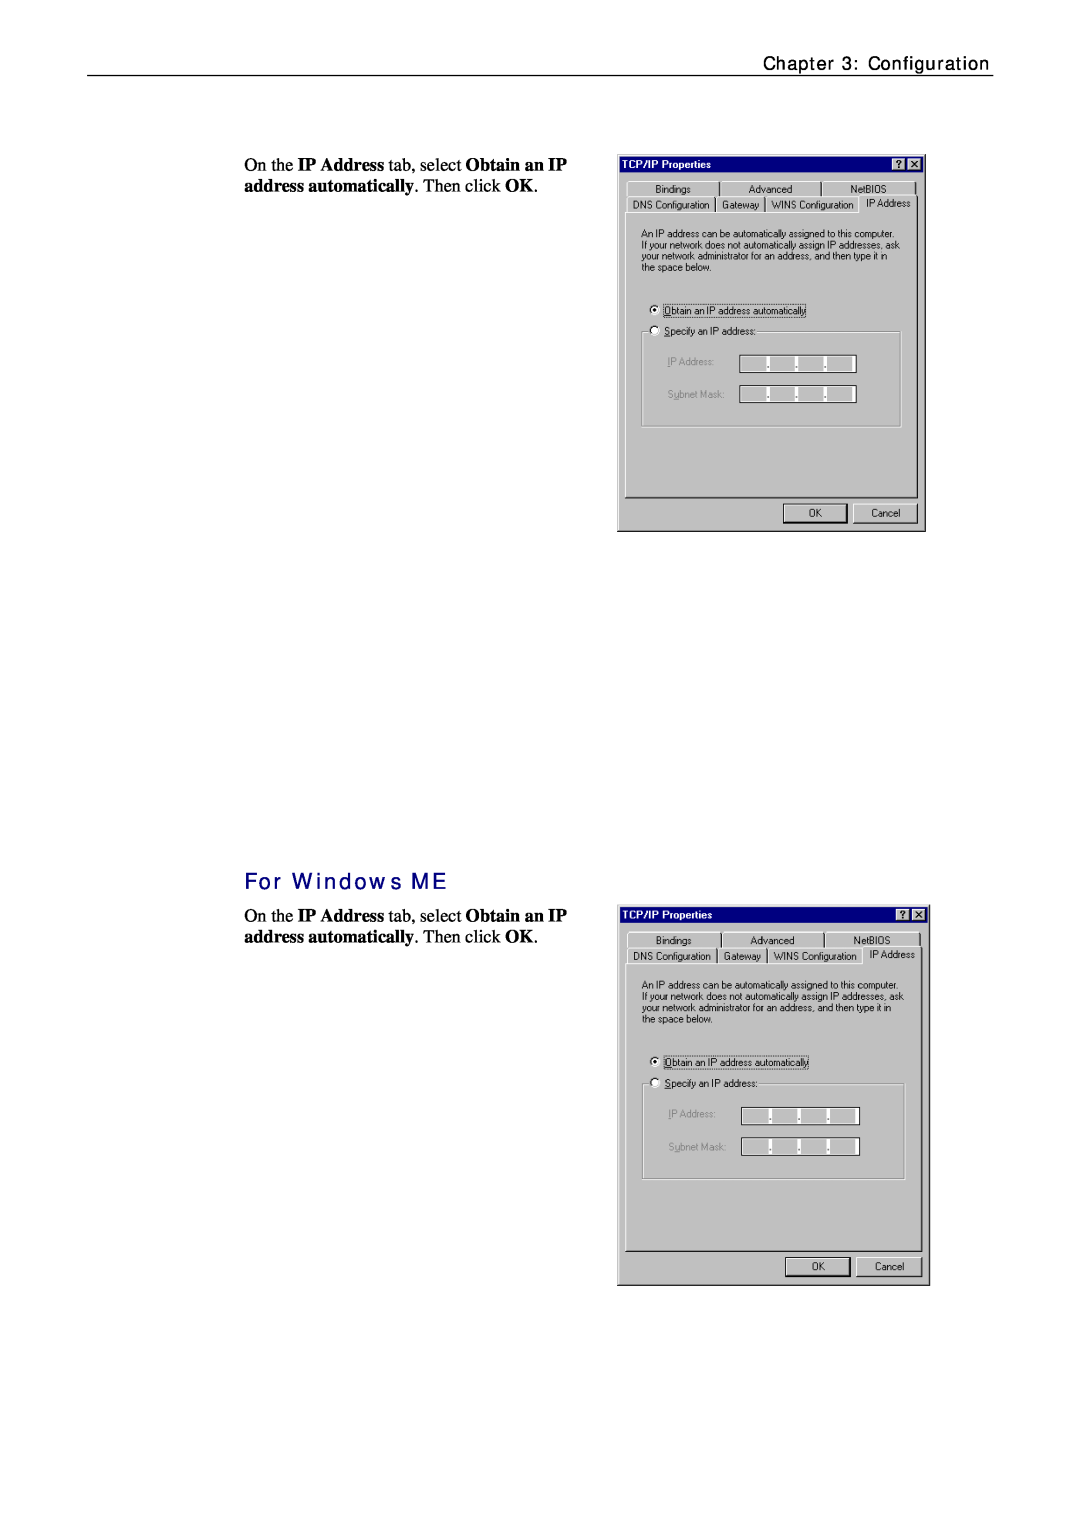 Siemens CL-010-I manual For Windows ME, Configuration 